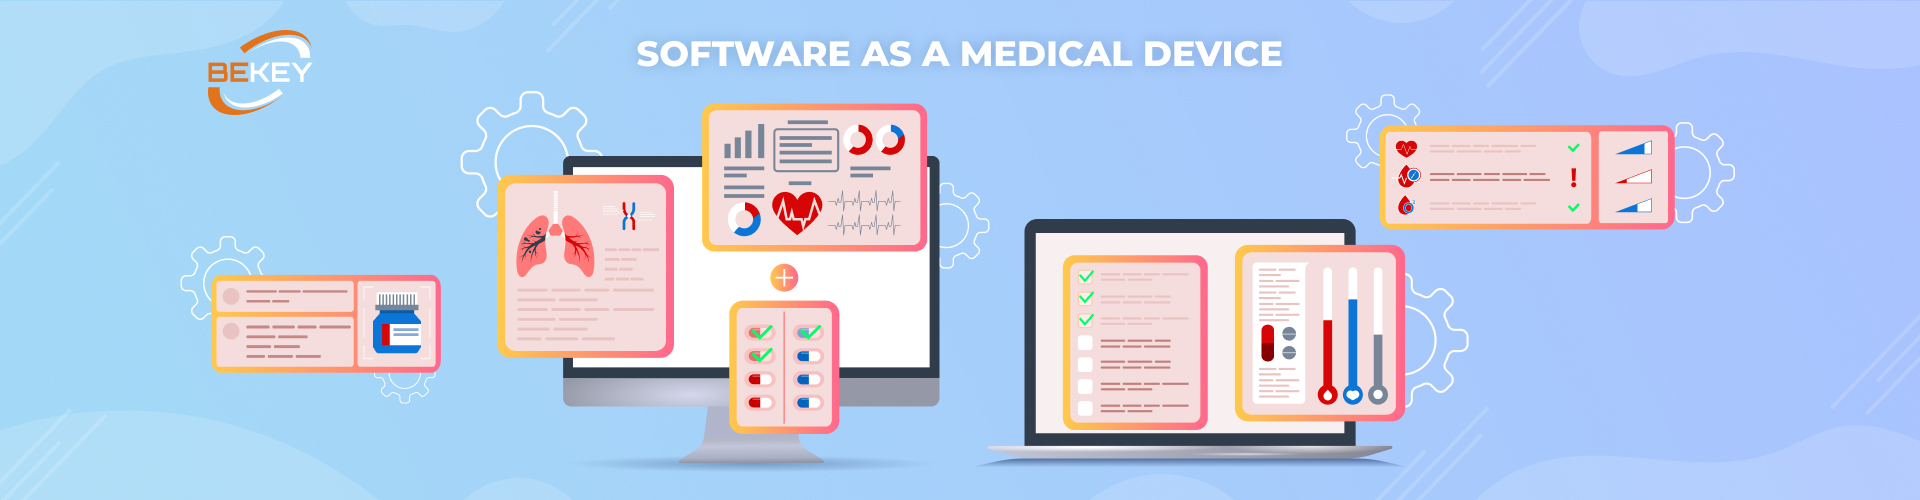 Understanding Software as a Medical Device - image